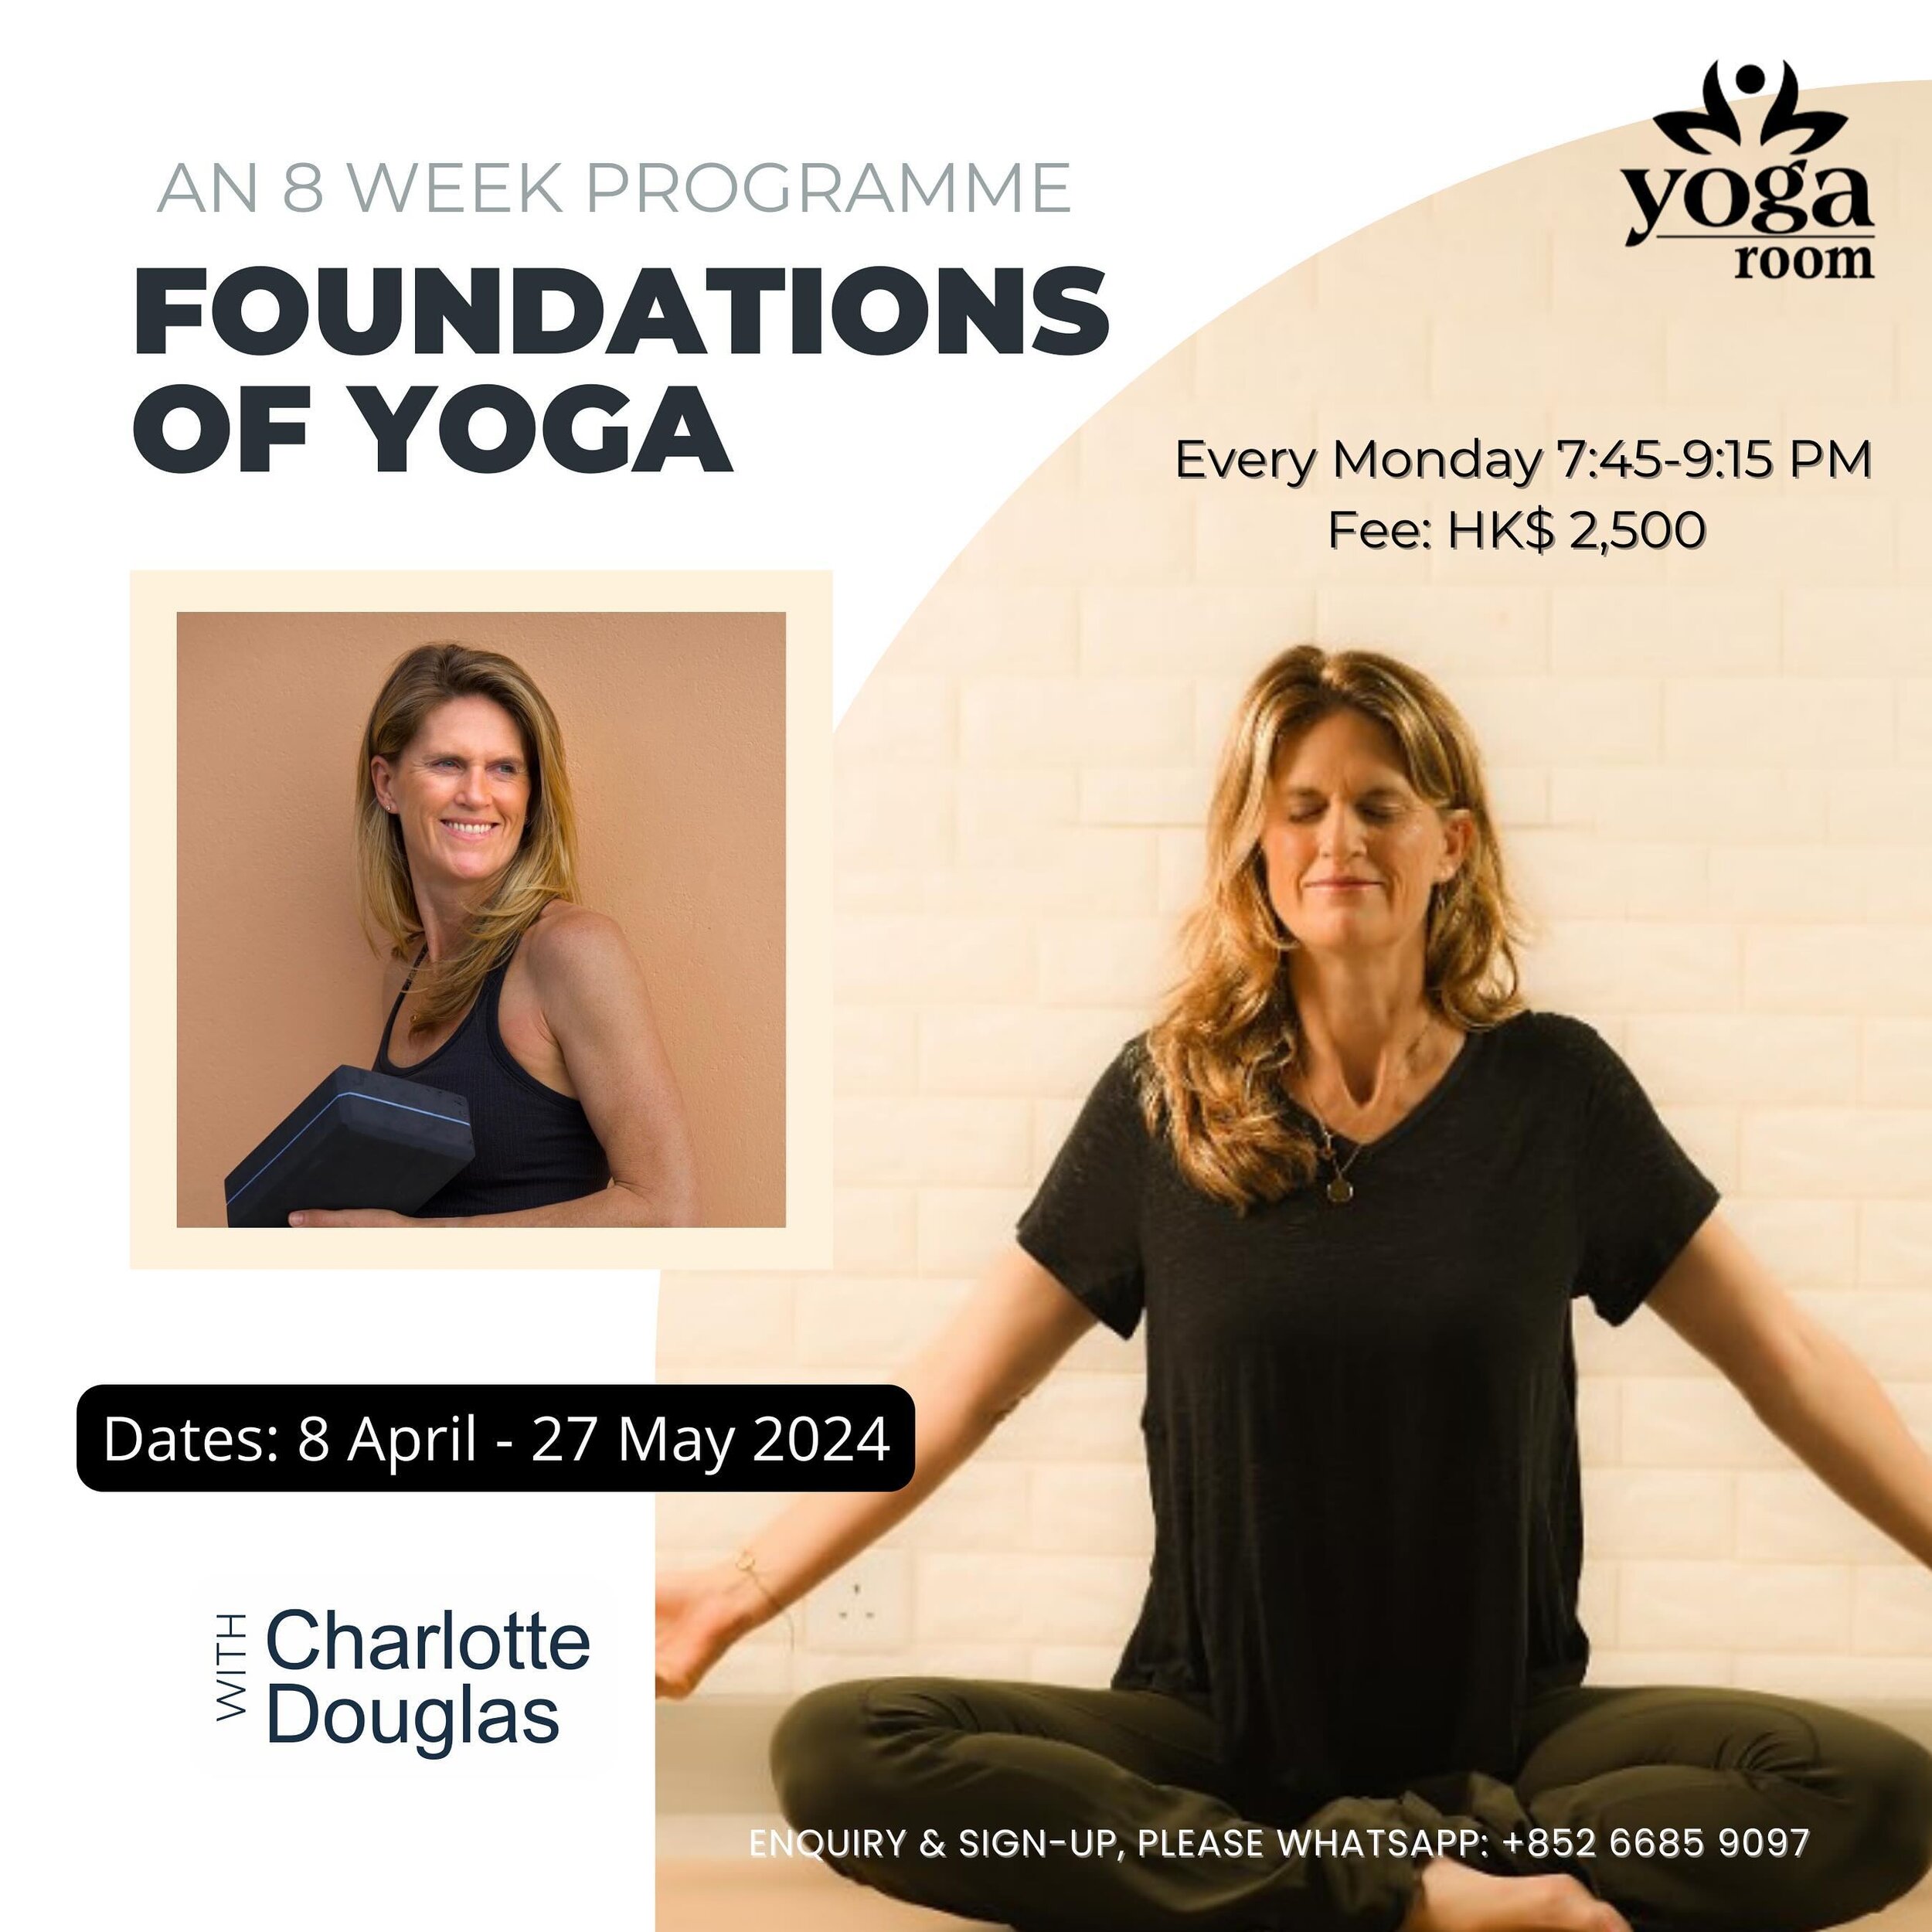 New Intake Open❗️Foundations of Yoga - 8 week programme with @charlotte_douglas_yoga 

🦋 If you would like to join the next cohort of students in this programme, we start again on April 8th!

Foundations of Yoga - 8-week programme with Charlotte Dou